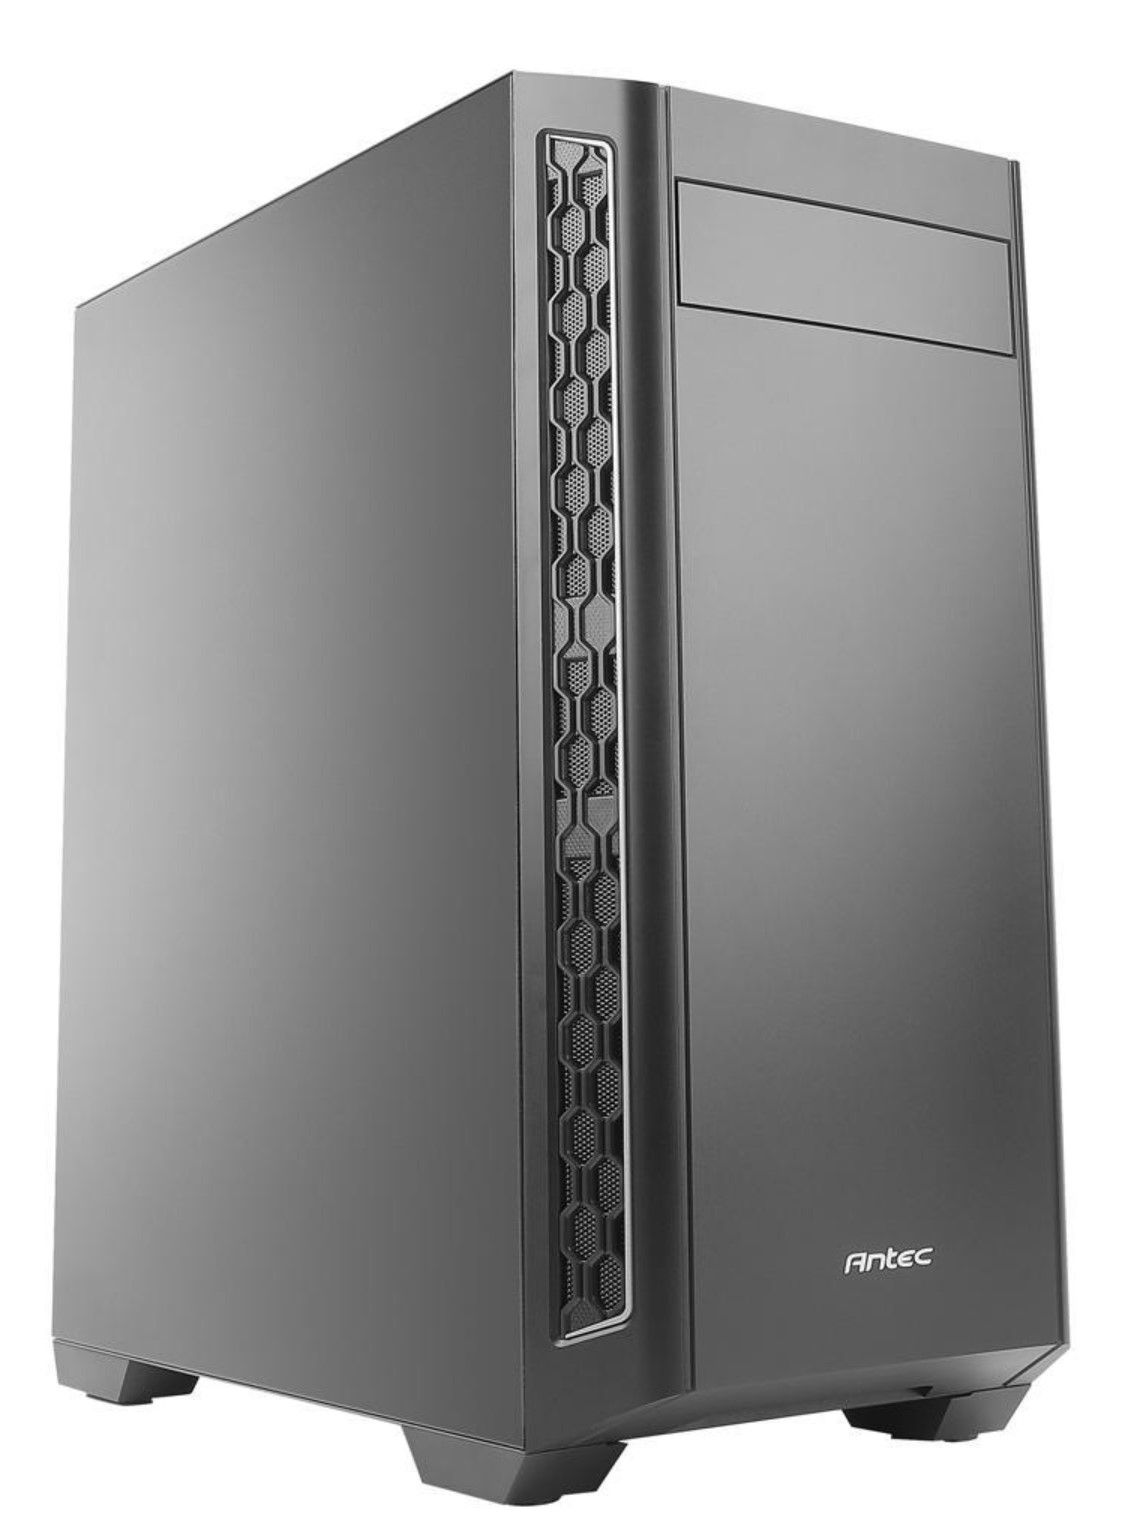 The Antec Performance Series P7 Neo Case Mid-Tower Case